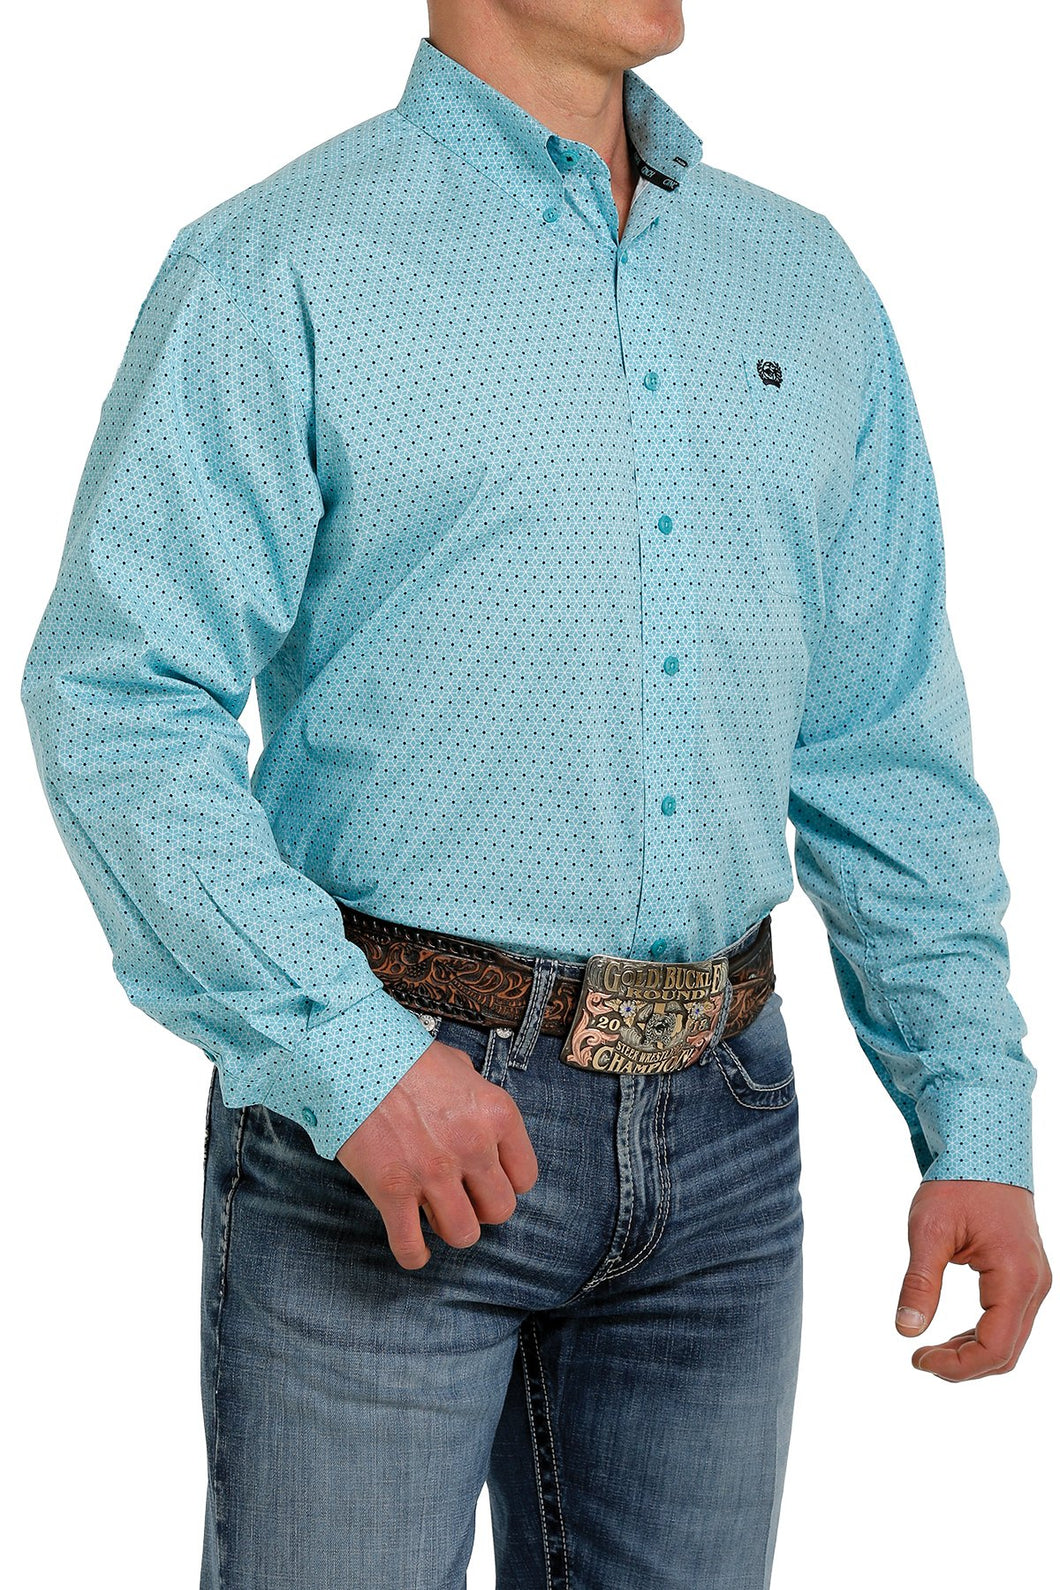 MEN'S STRETCH HONEYCOMB PRINT BUTTON-DOWN WESTERN SHIRT - TURQUOISE